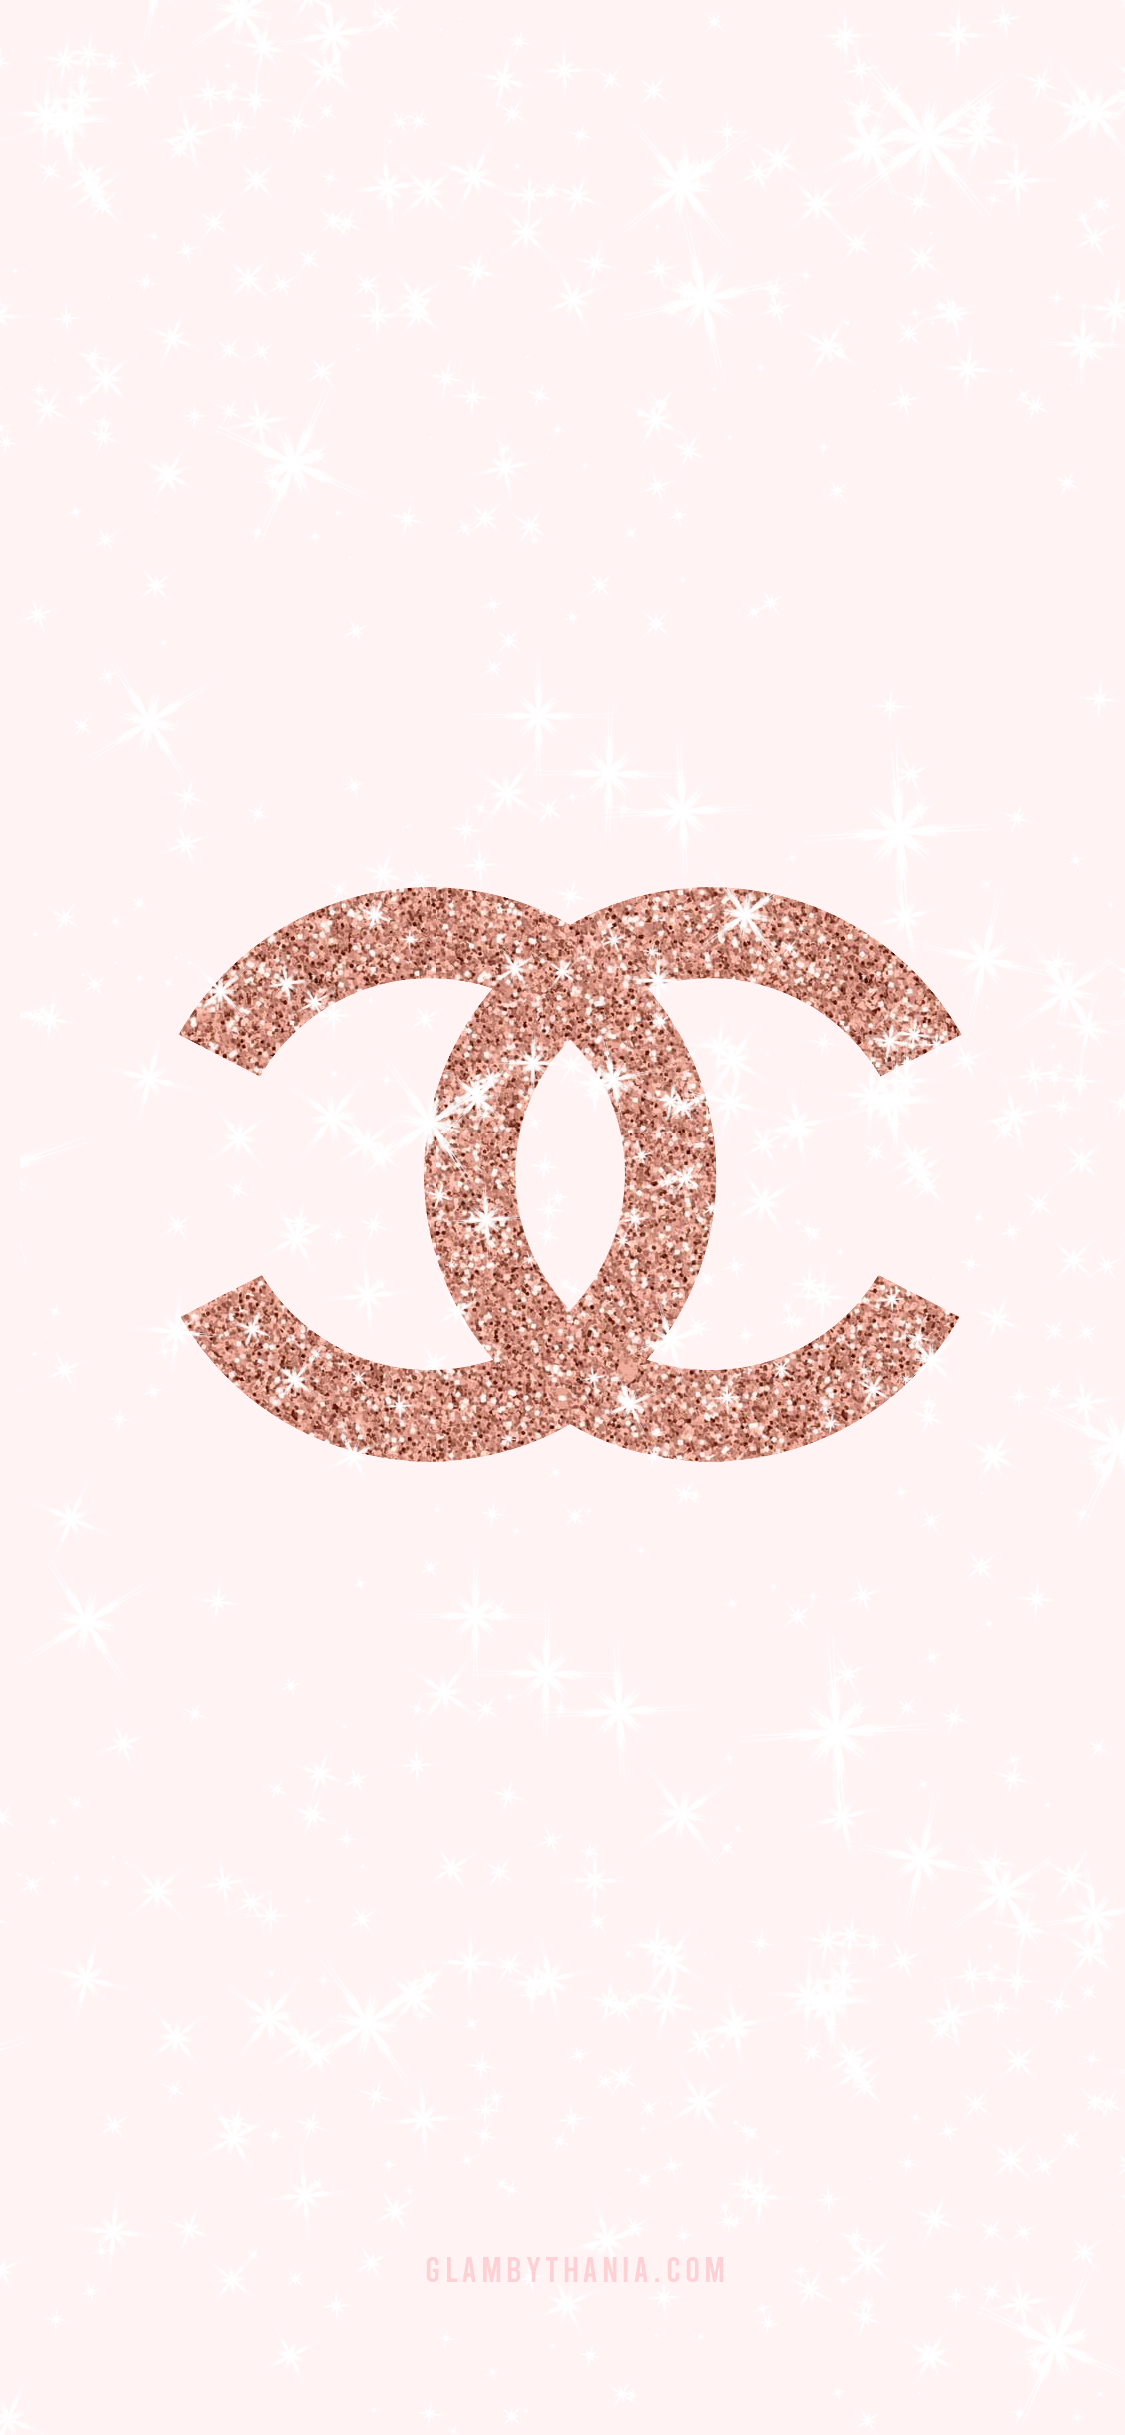 Chanel Wallpaper Pink Girly iPhone